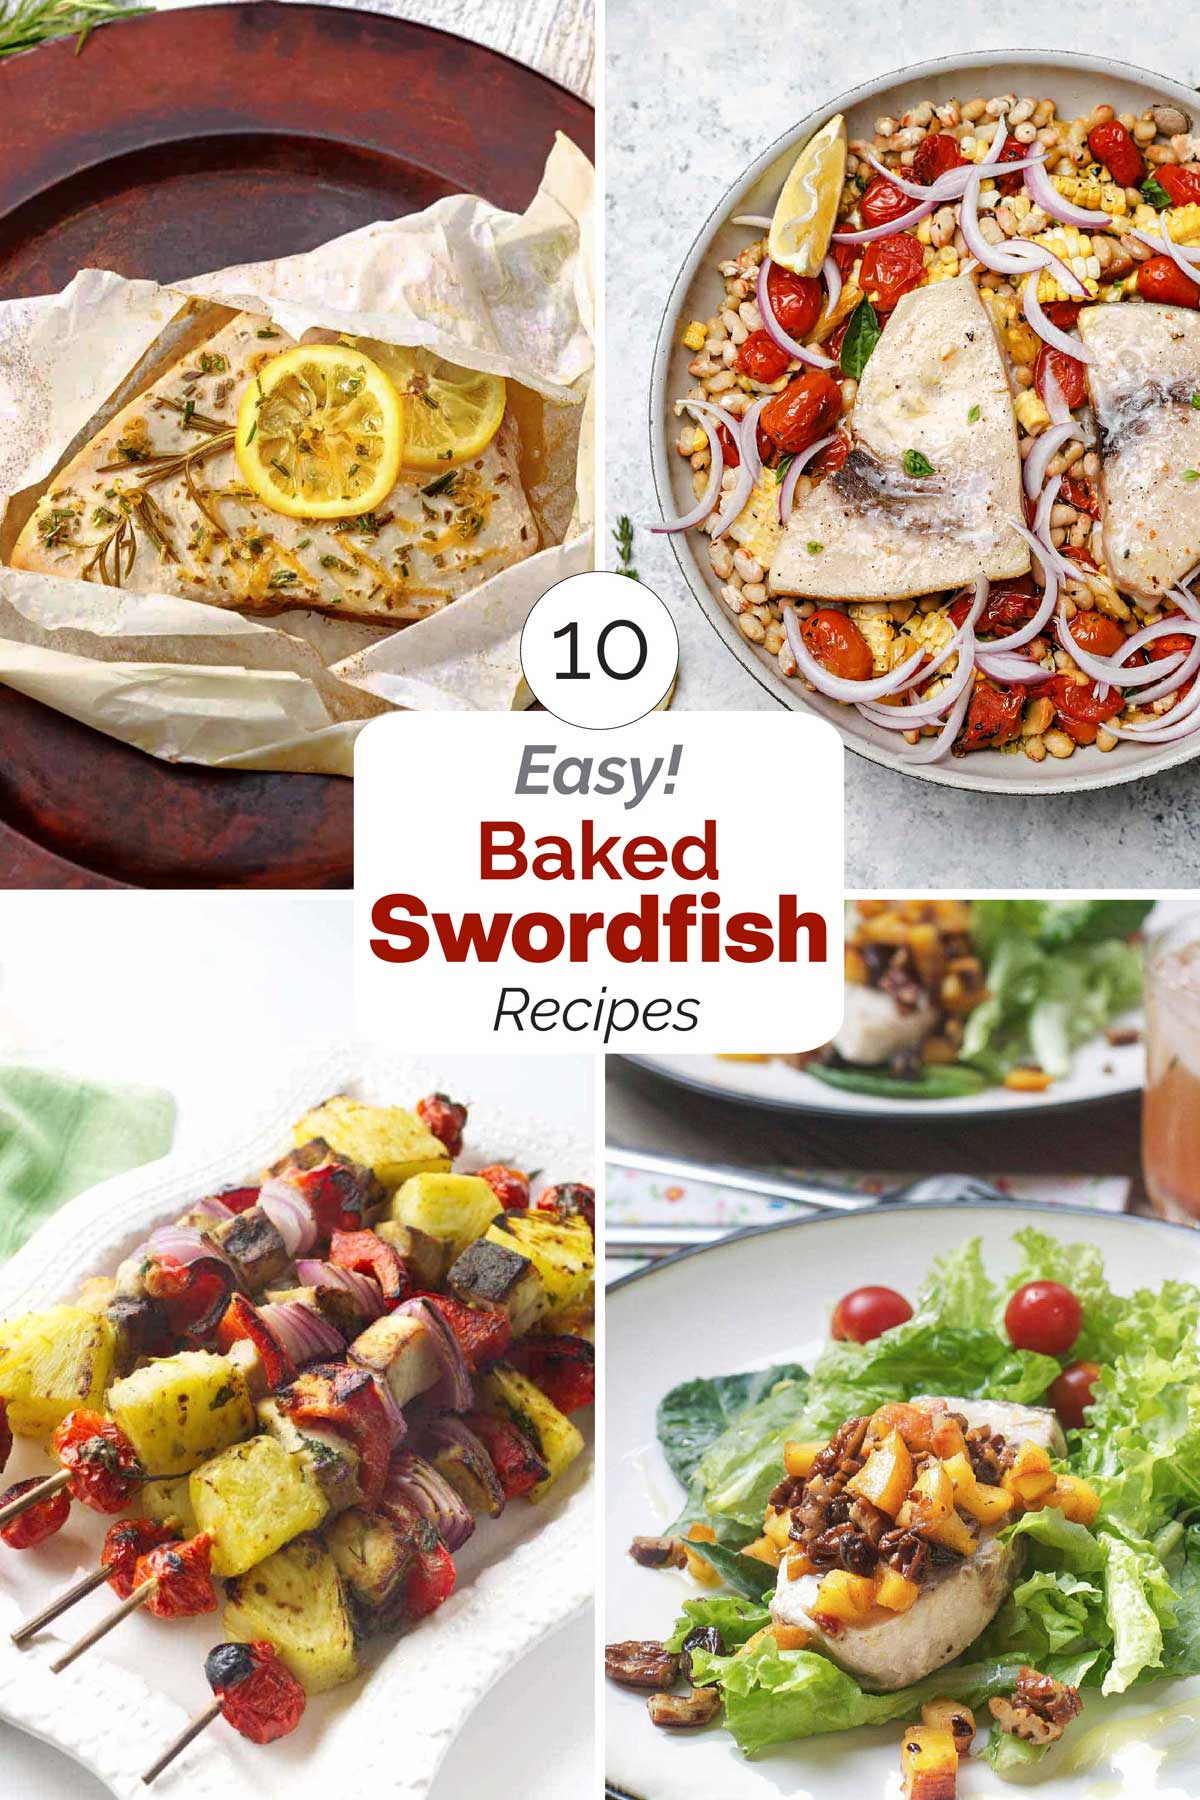 Collage of four recipe photos with central text overlay "10 Easy! Baked Swordfish Recipes".